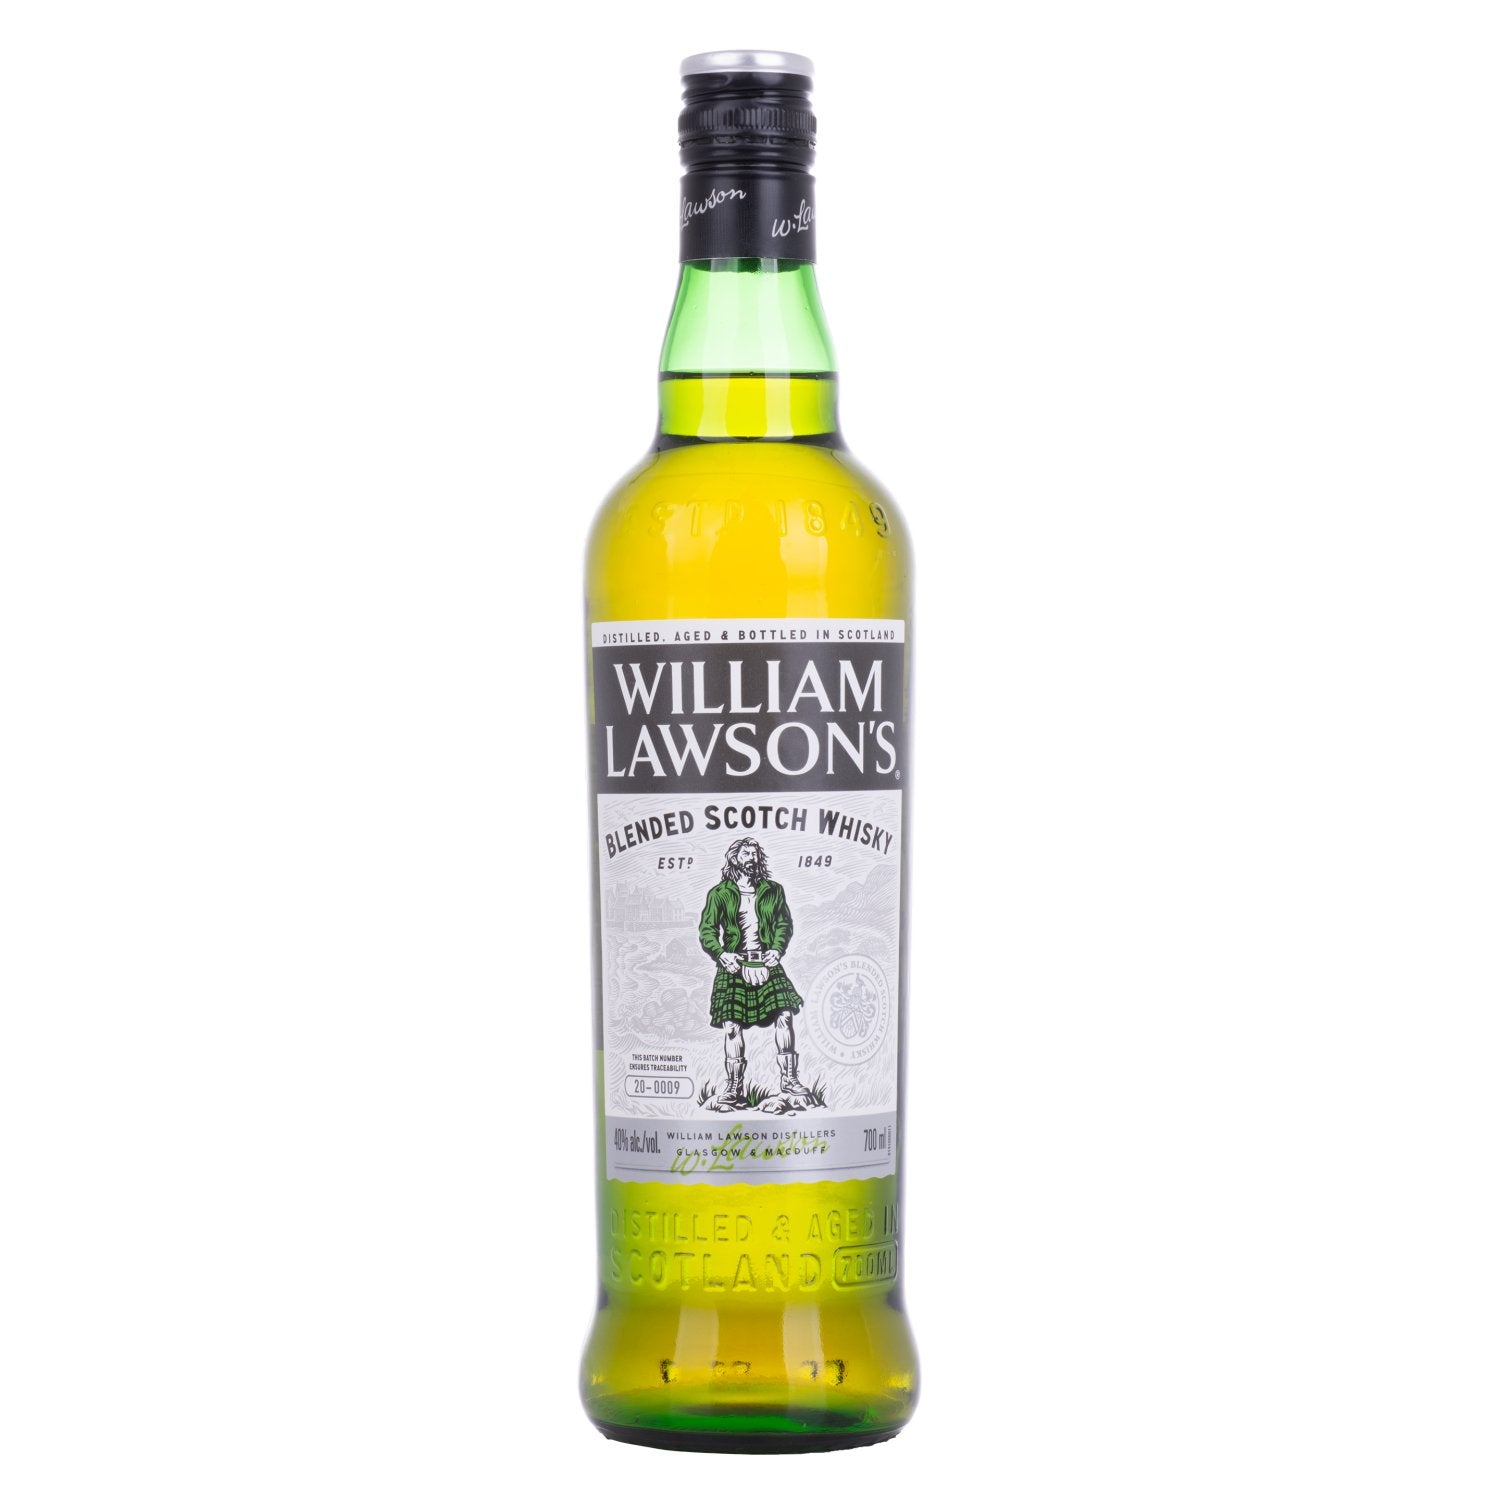 William Lawson's Blended Scotch Whisky 